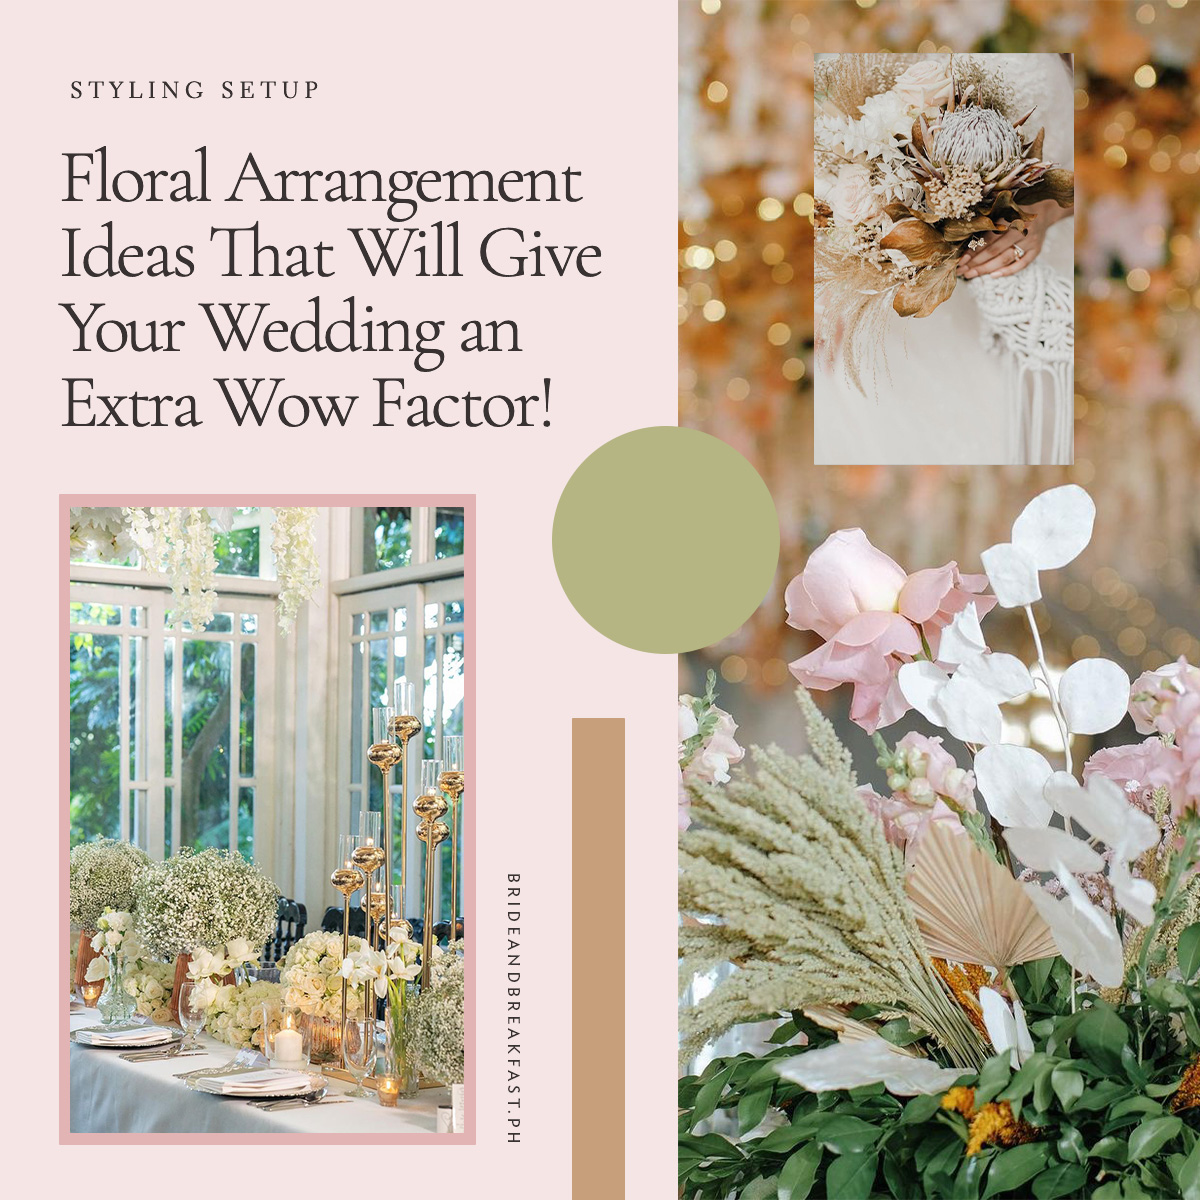 Floral Arrangement Ideas That Will Give Your Wedding an Extra Wow Factor!